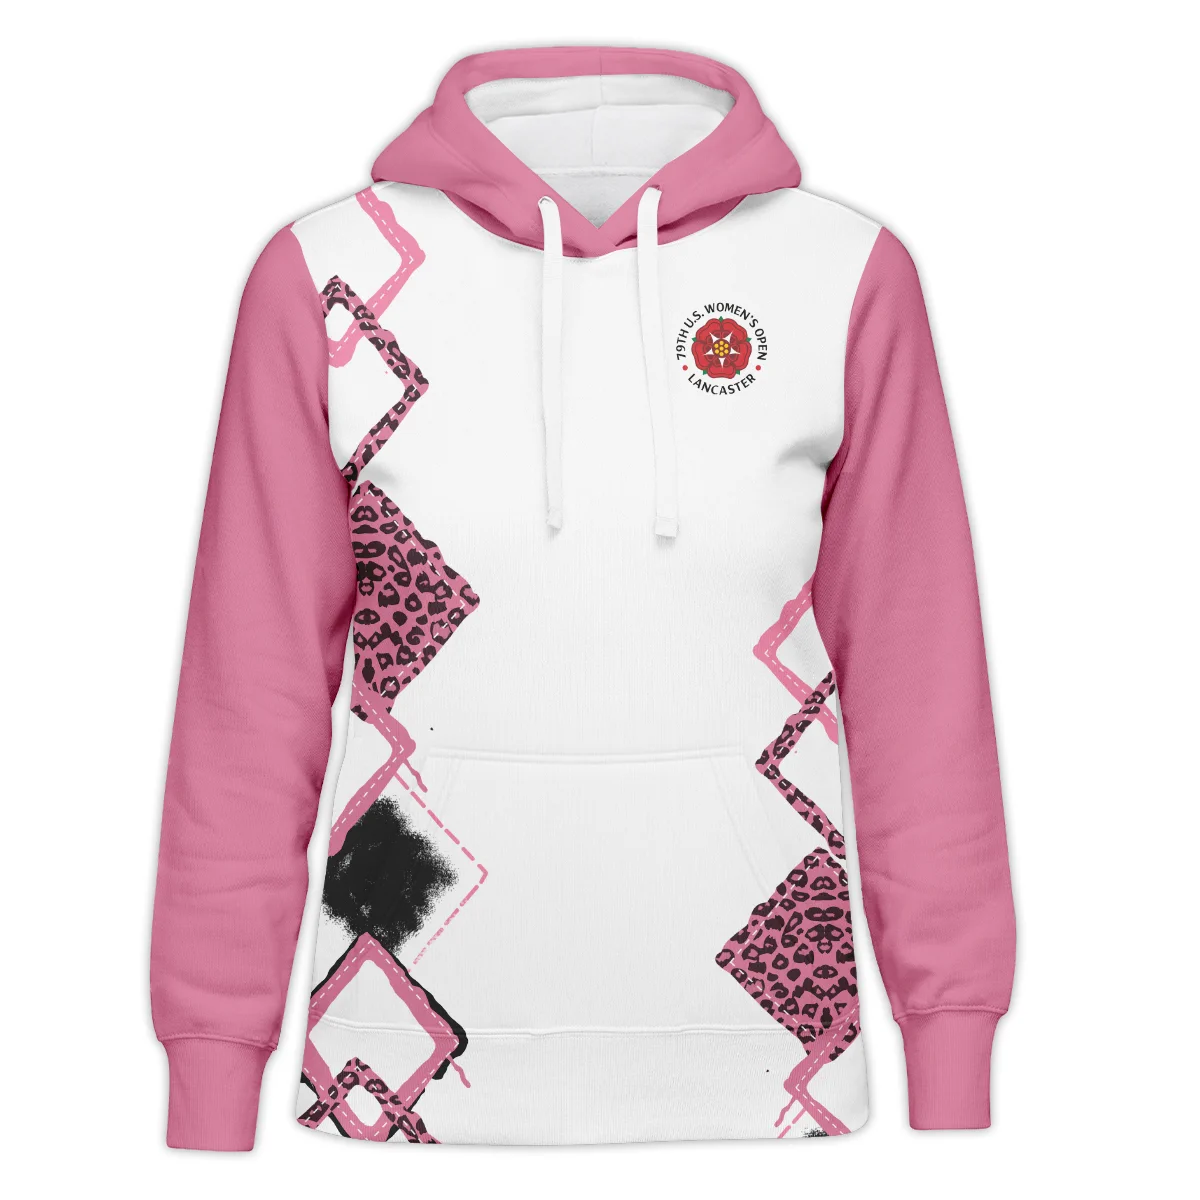 Leopard Golf Color Pink 79th U.S. Women’s Open Lancaster Long Polo Shirt Pink Color All Over Print Long Polo Shirt For Woman